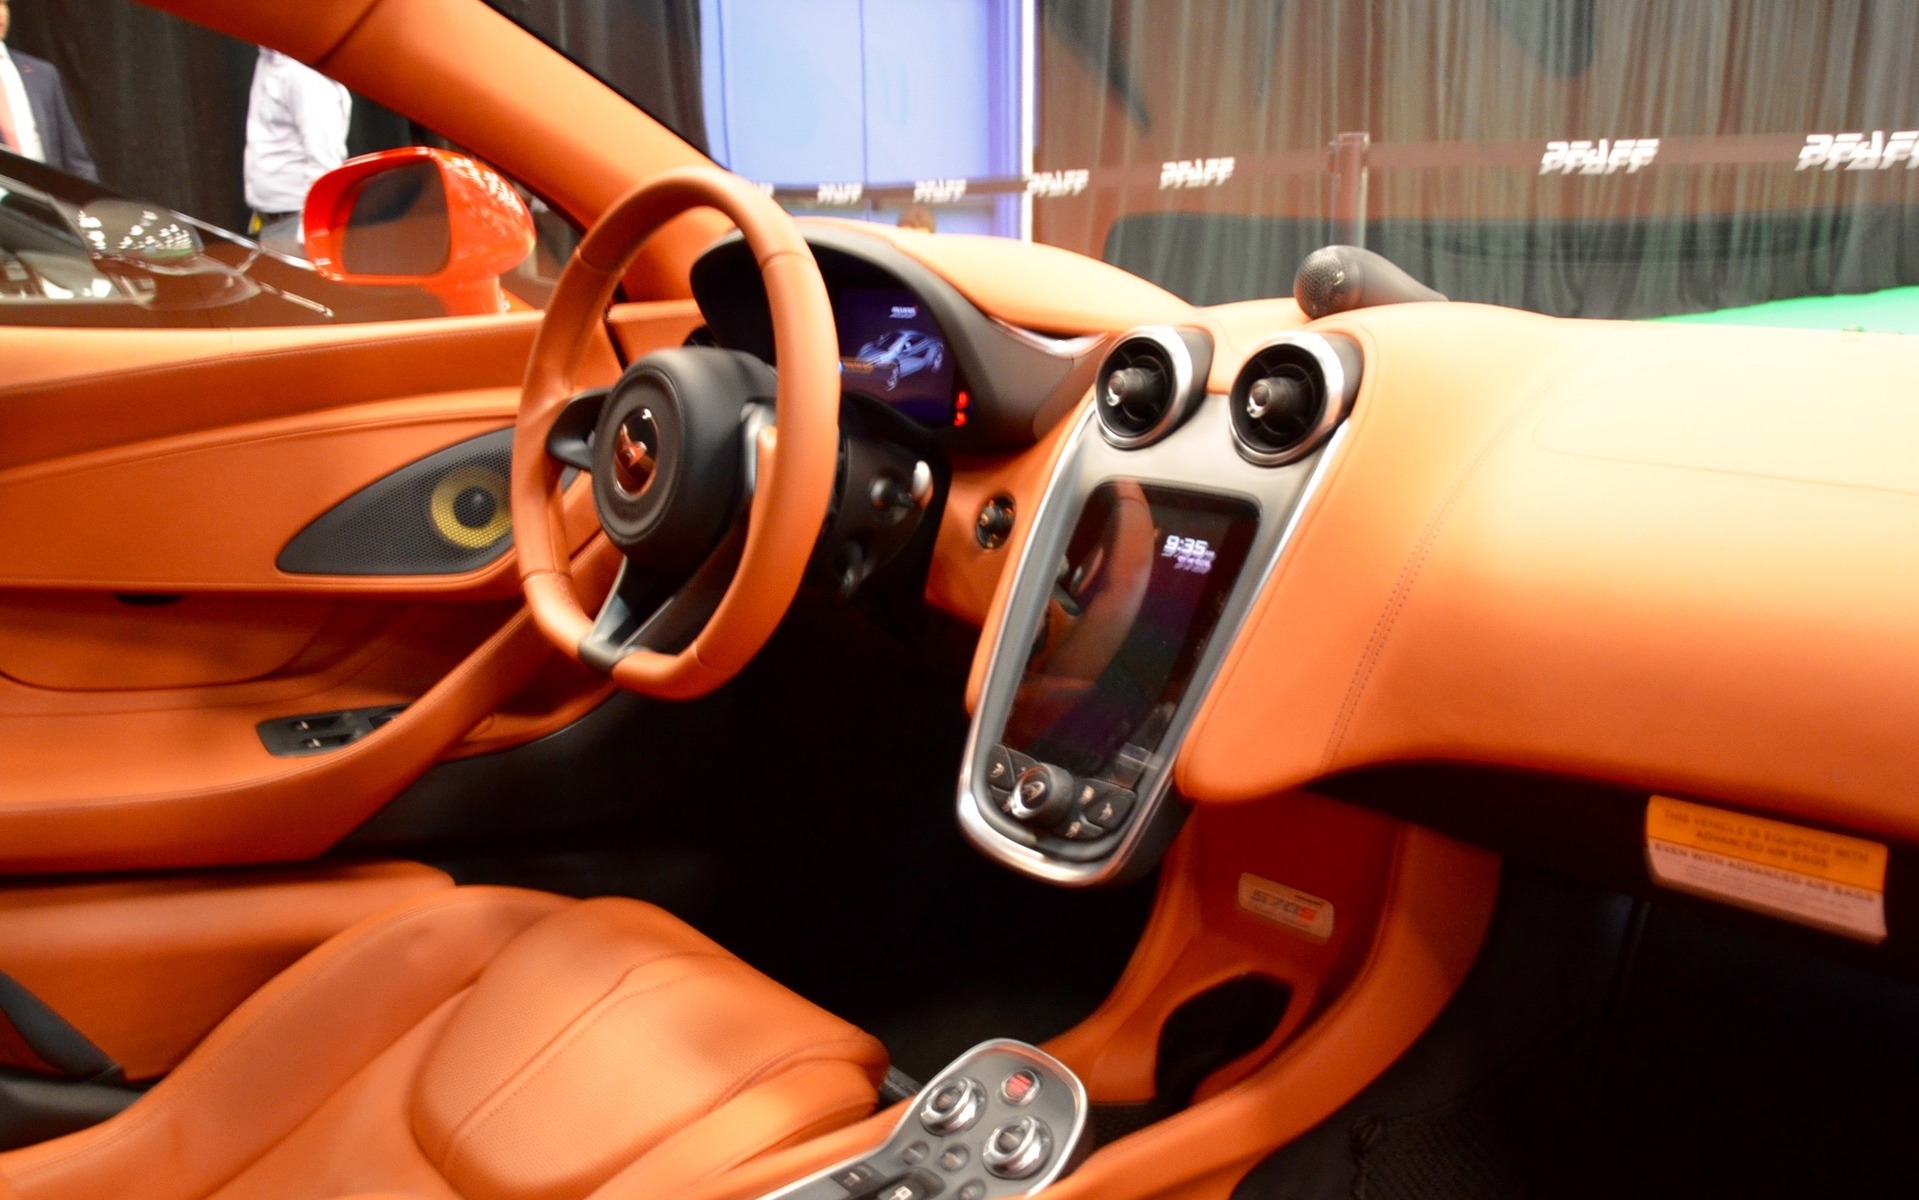 McLaren 570S at the 2016 Montreal Auto Show